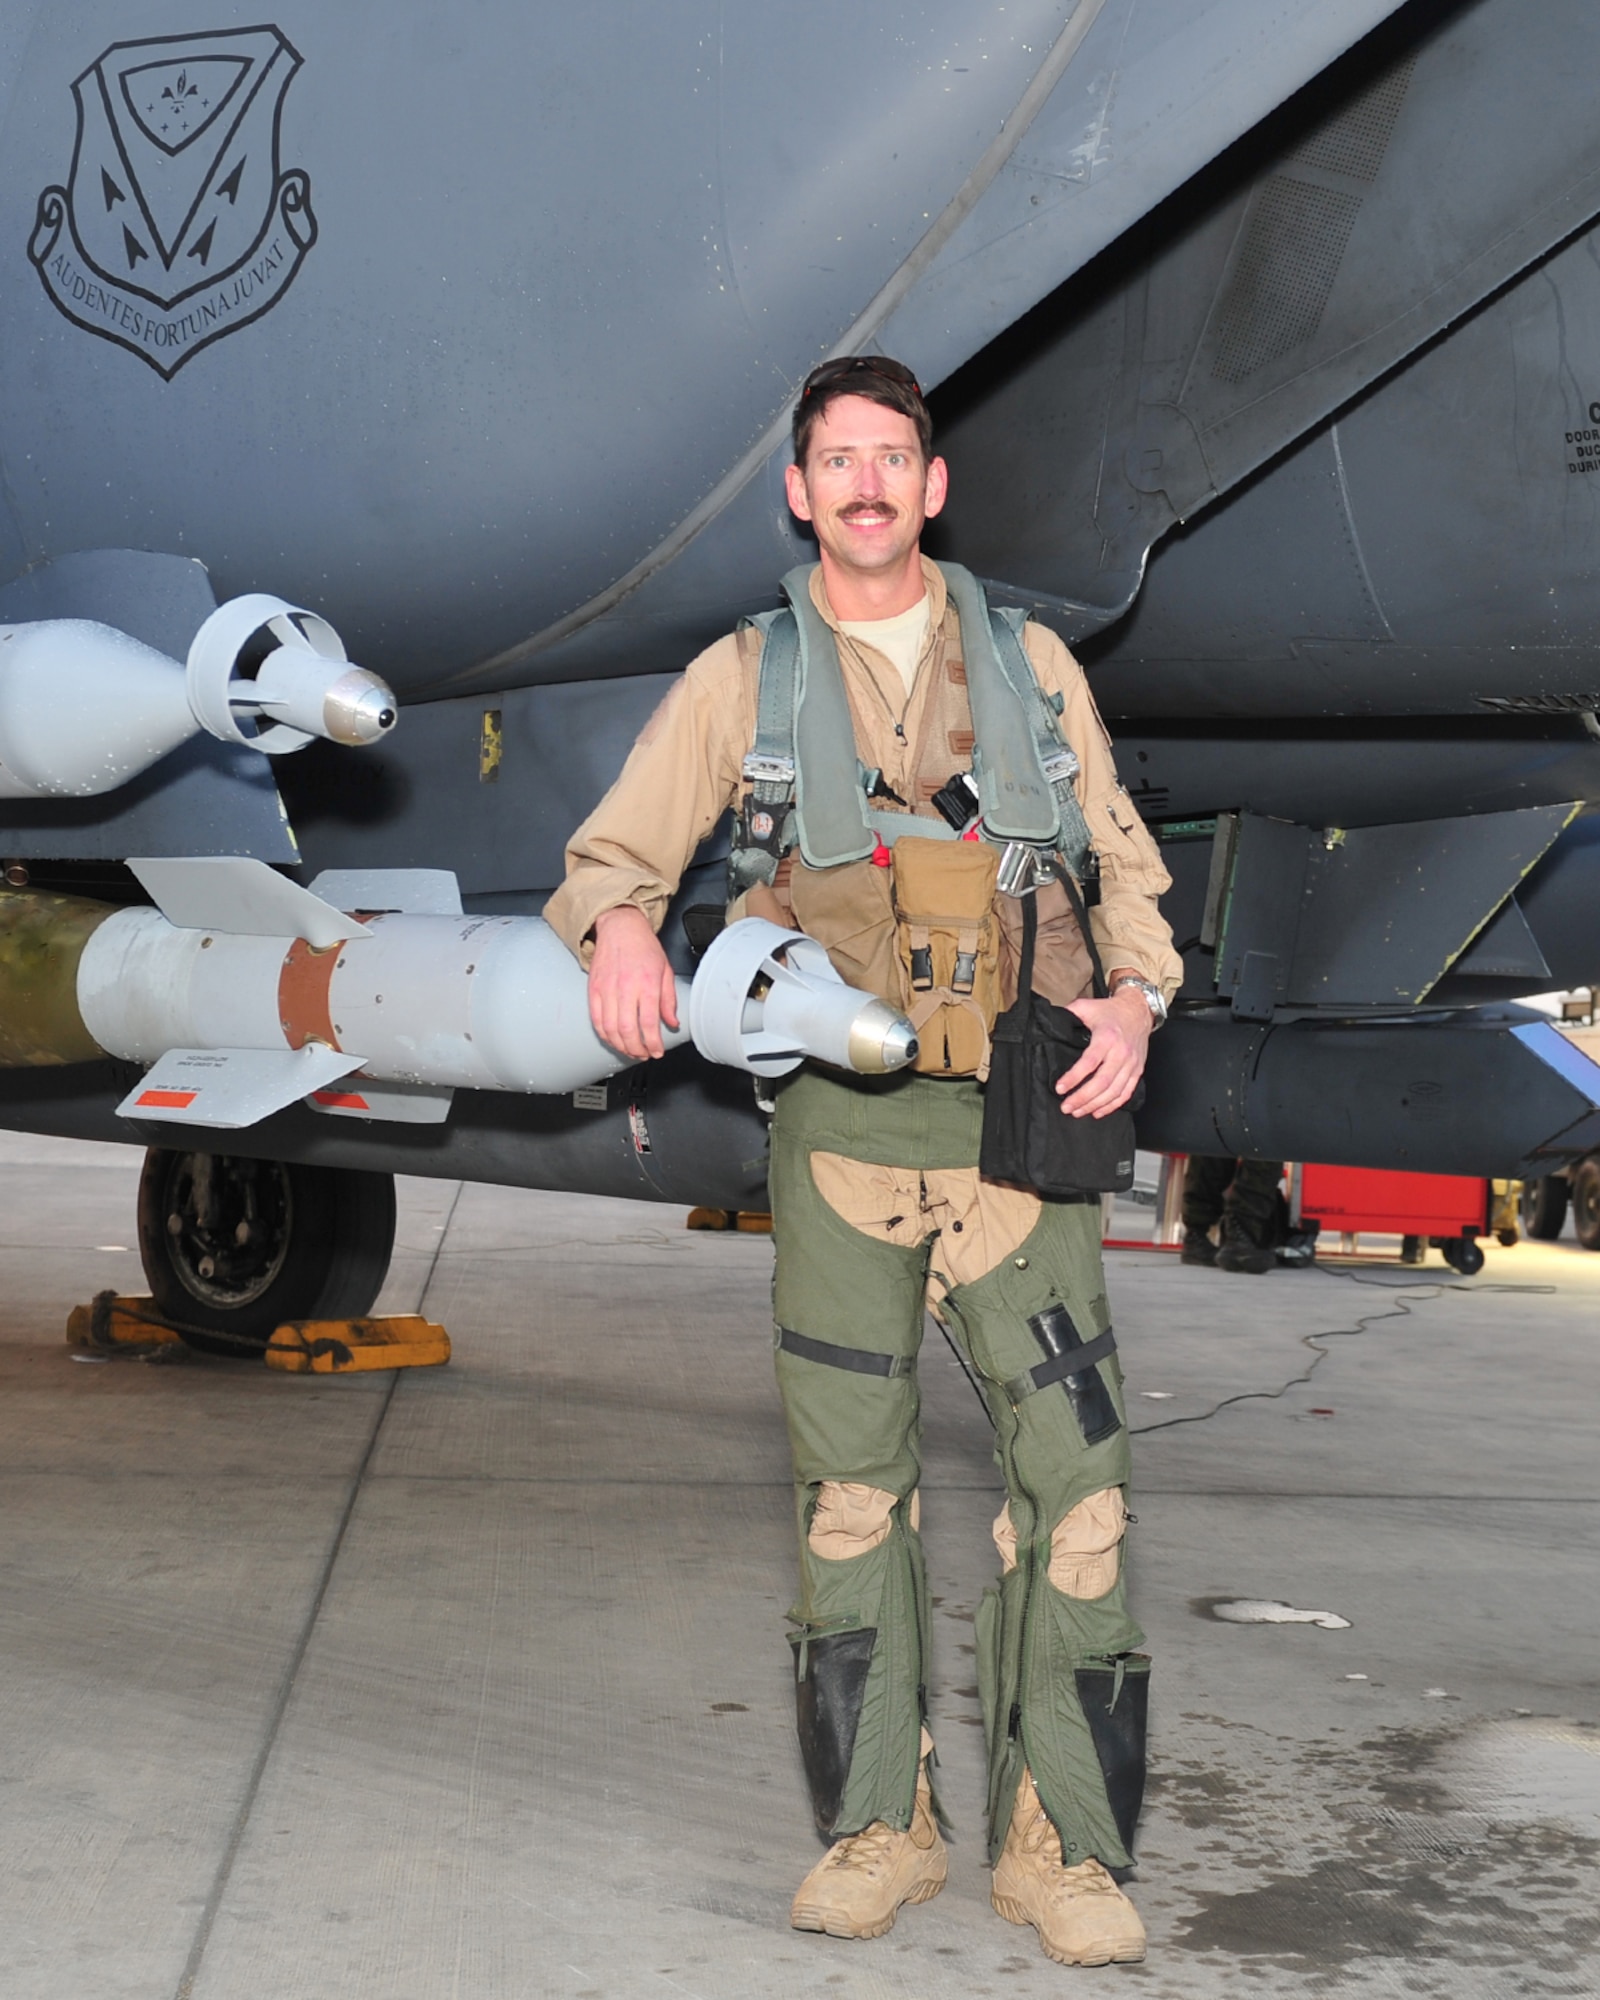 Lt. Col. Bash, 391st Expeditionary Fighter Squadron weapons system officer and instructor, poses for a photo with an F-15E Strike Eagle fighter aircraft after returning from his 1,000 combat flying hour milestone sortie at undisclosed location in Southwest Asia, April 9, 2016. The 1,000 hour milestone, an equivalent to more than 40 days in combat, is lauded as a rare achievement, which some flyers never achieve. (U. S. Air Force photo by Staff Sgt. Kentavist P. Brackin/Released)